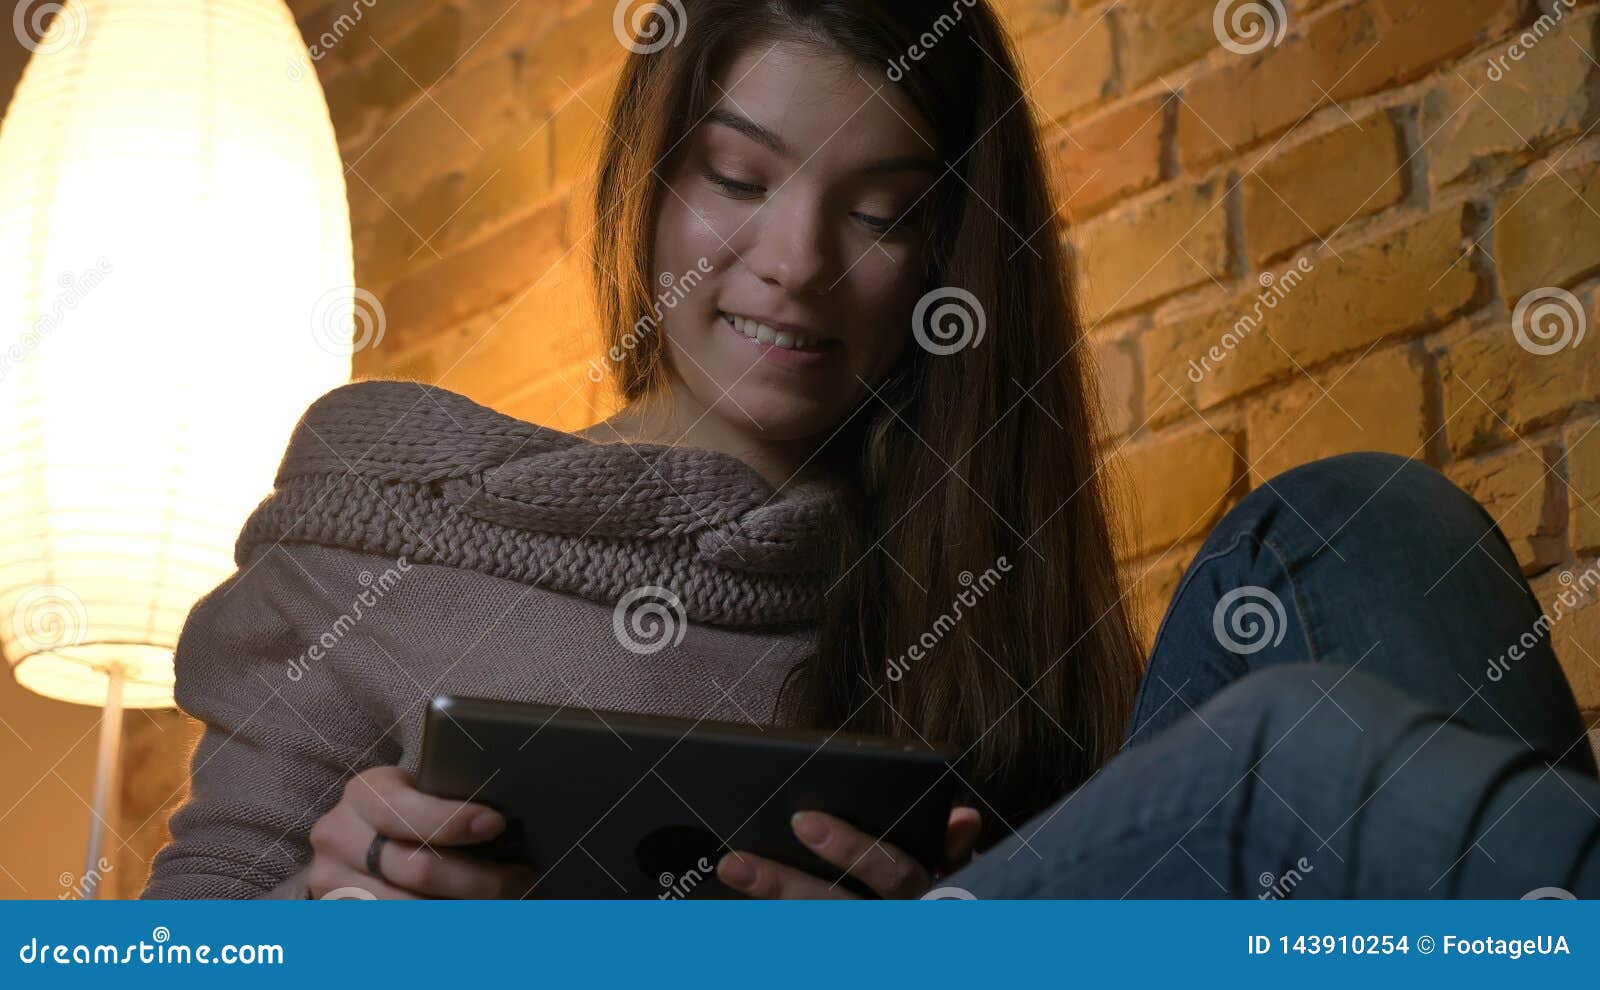 closeup portrait of young attractive caucasian female using the tablet while resting laidback on the sofa and smiling